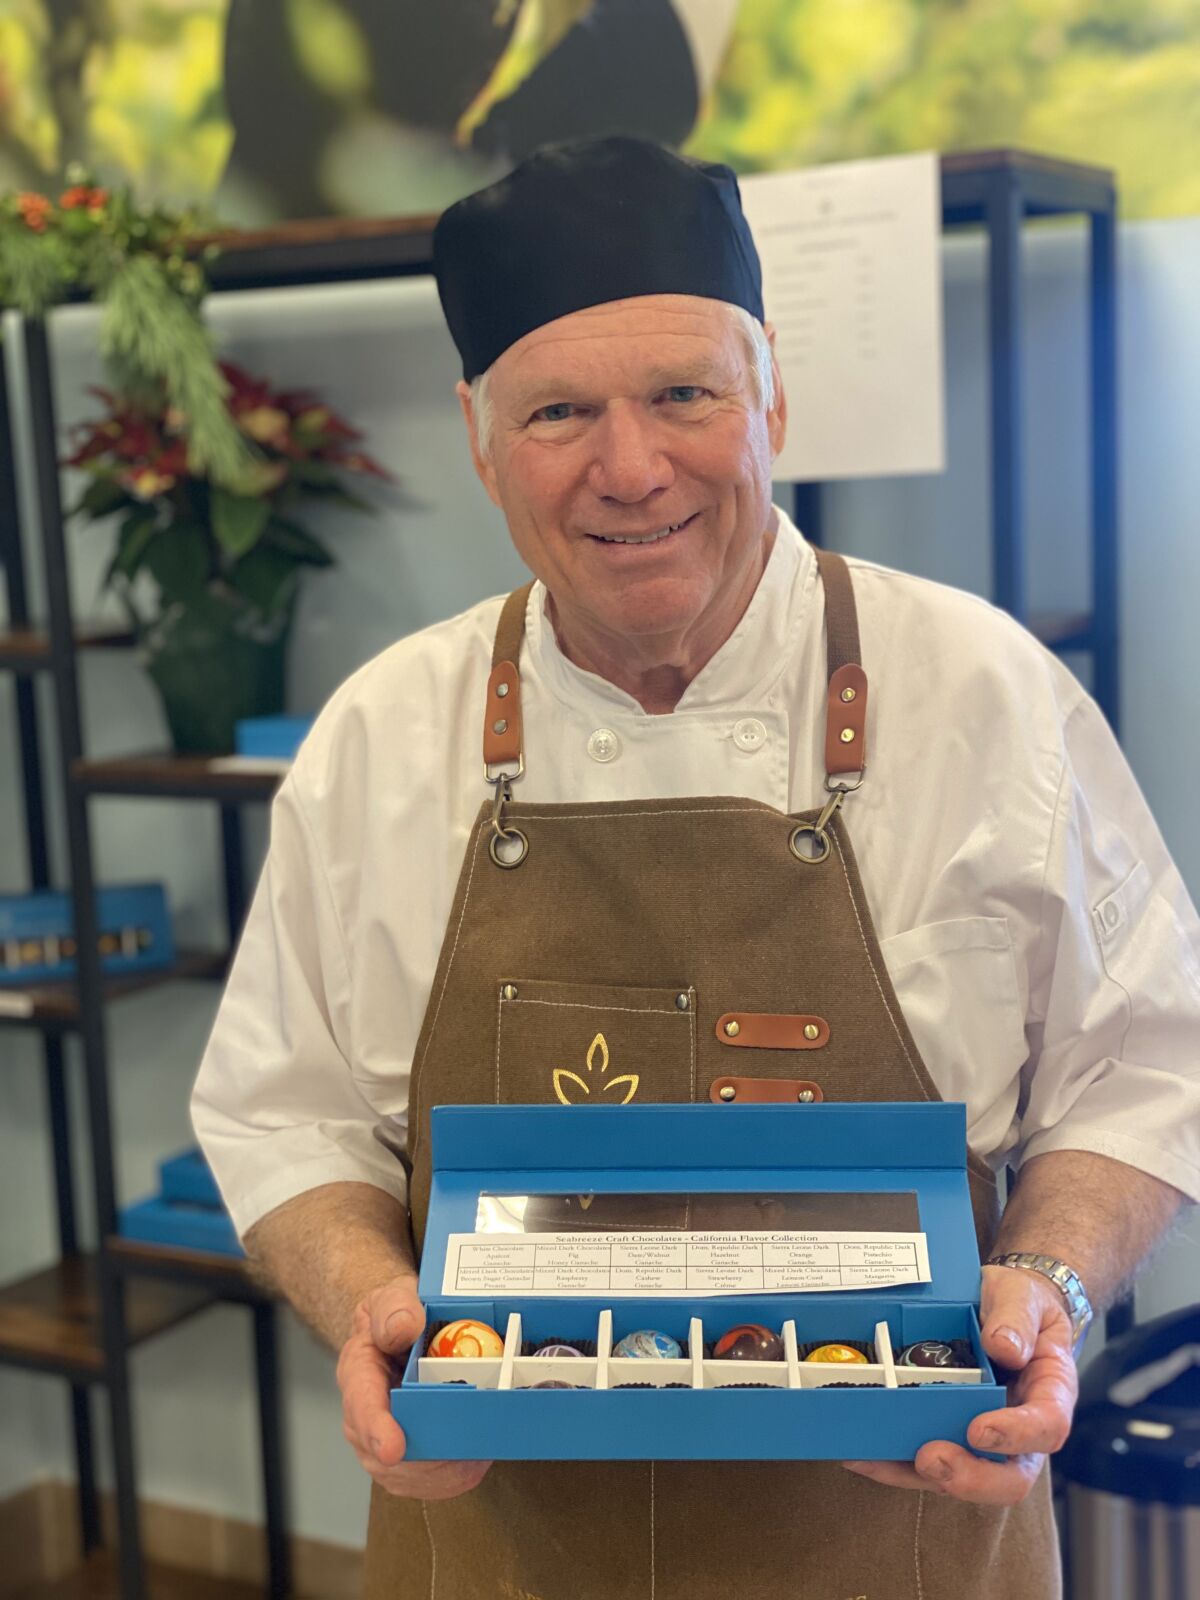 Seabreeze Craft Chocolate owner and chocolatier Jim Lantry.